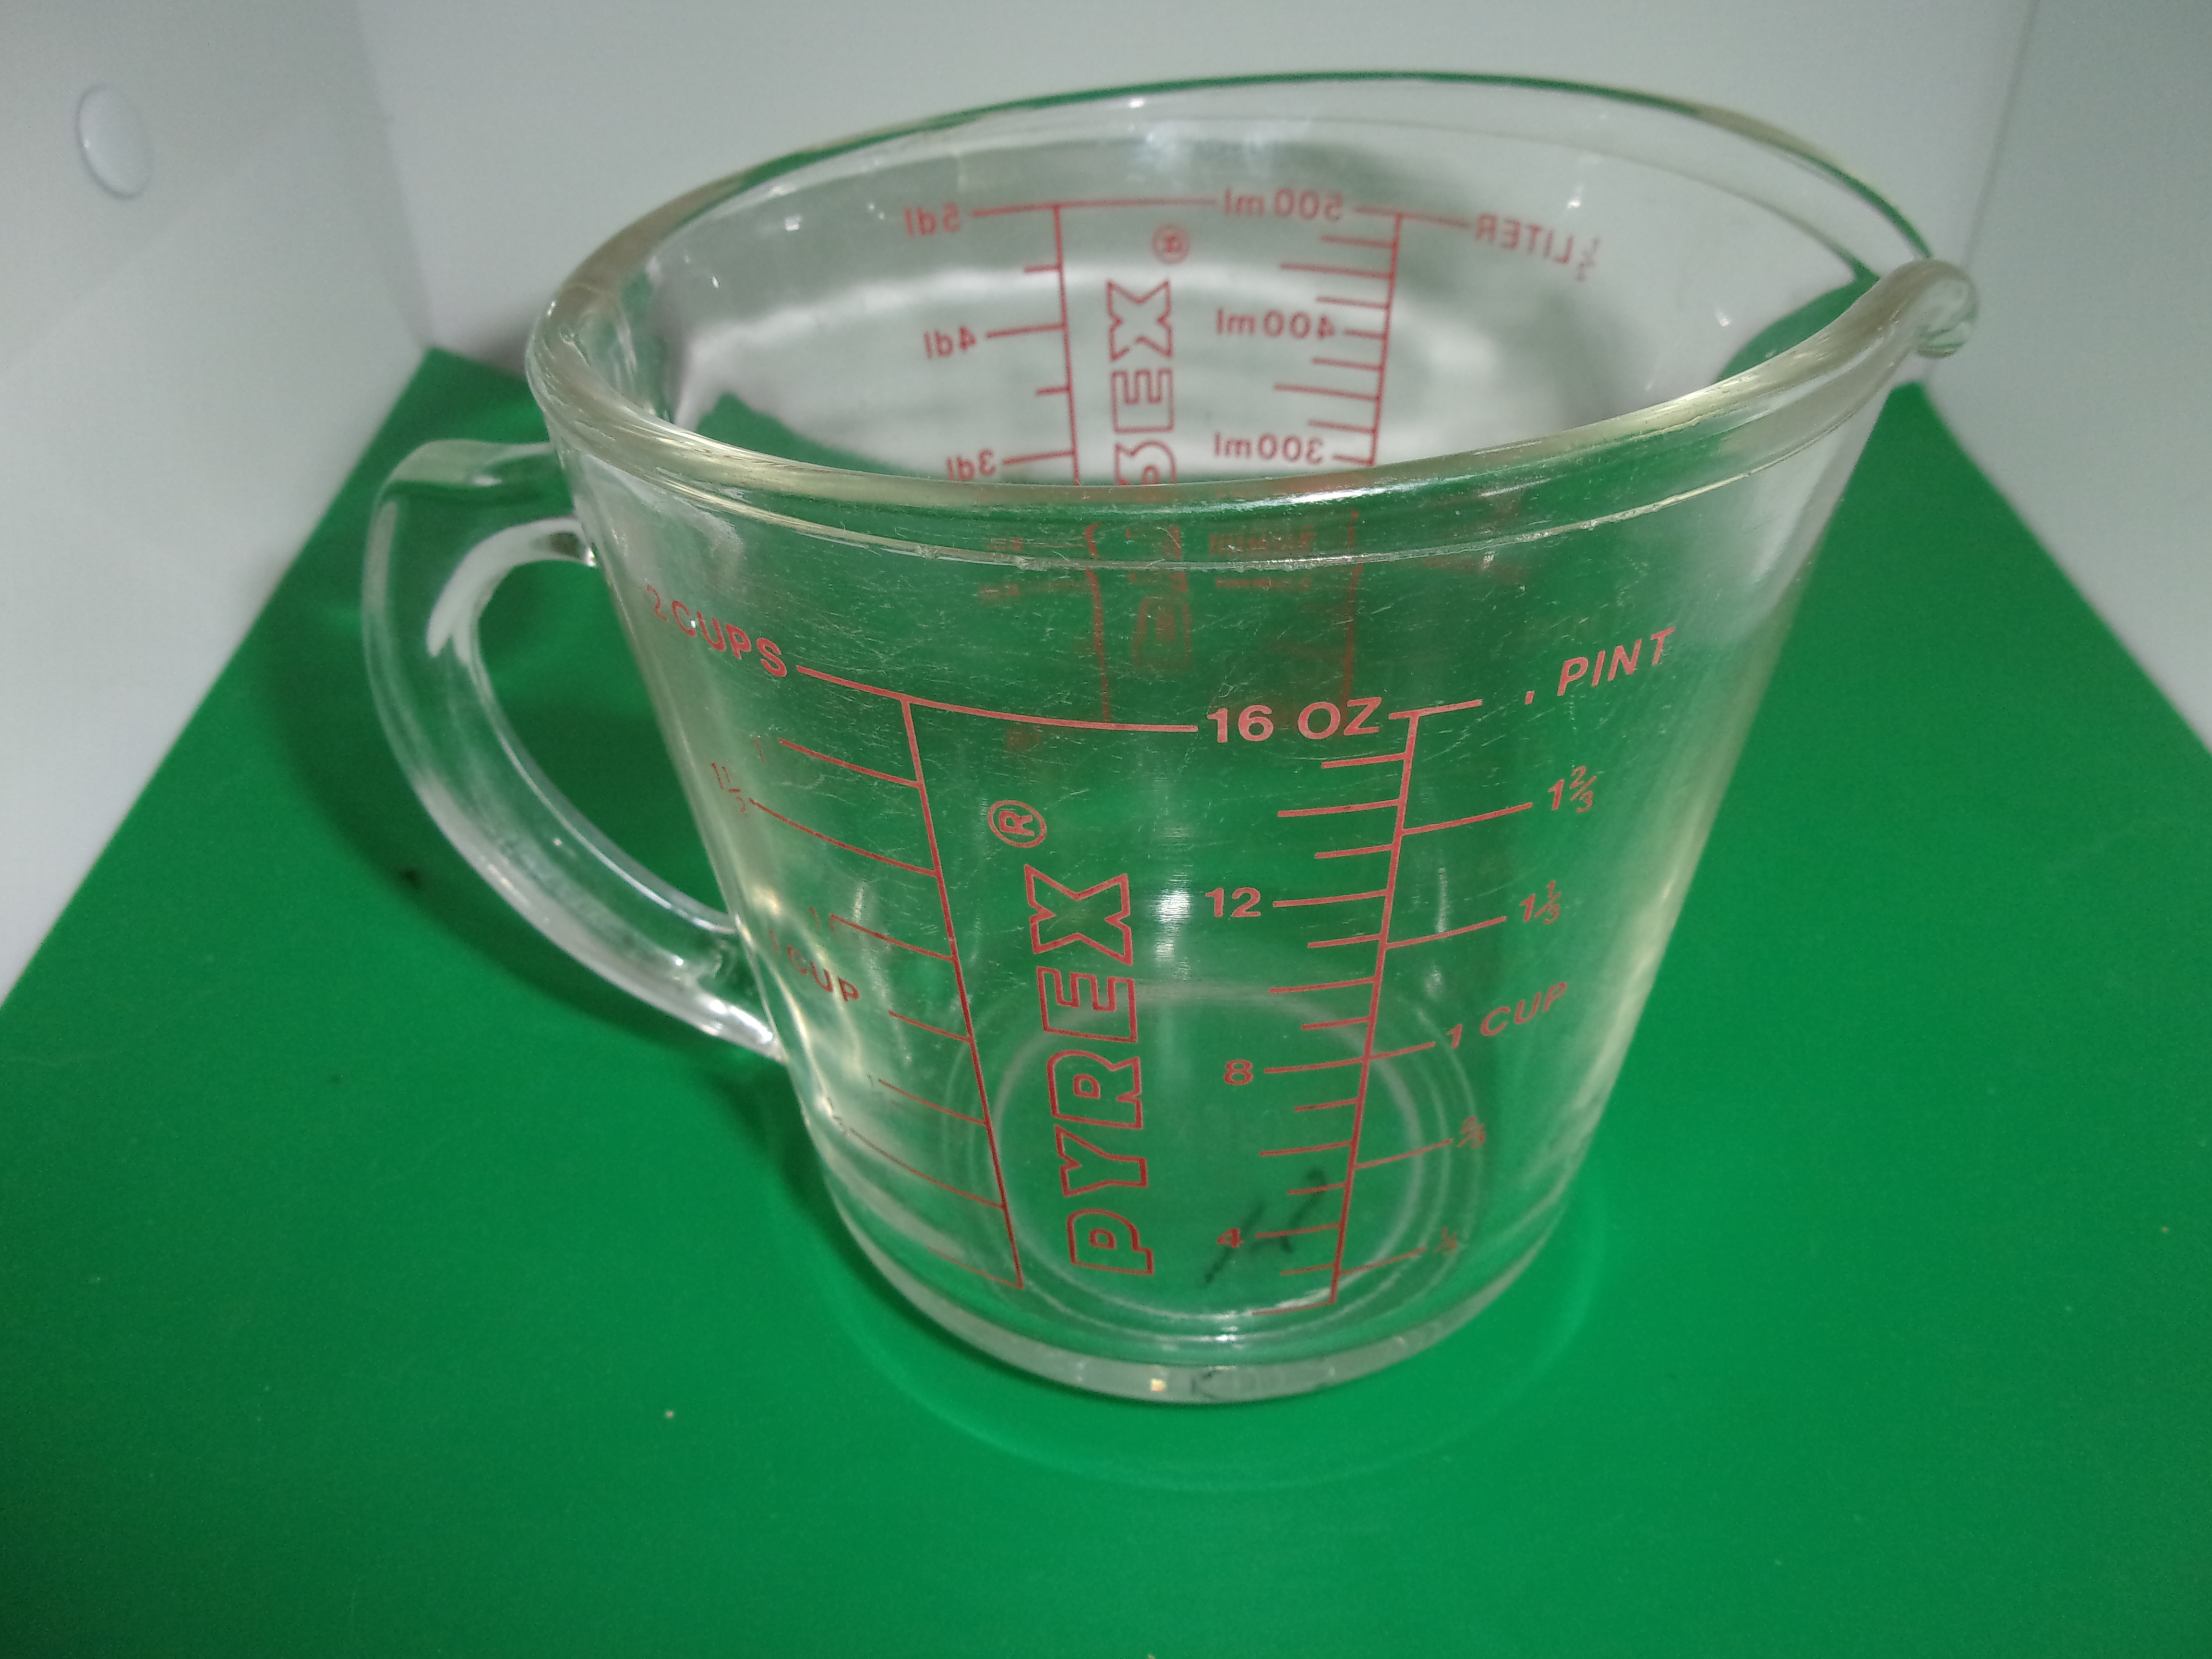 Vintage Pyrex 1 Cup Measuring Cup #508 Red Outline Print D-Handle (A) No  Metric